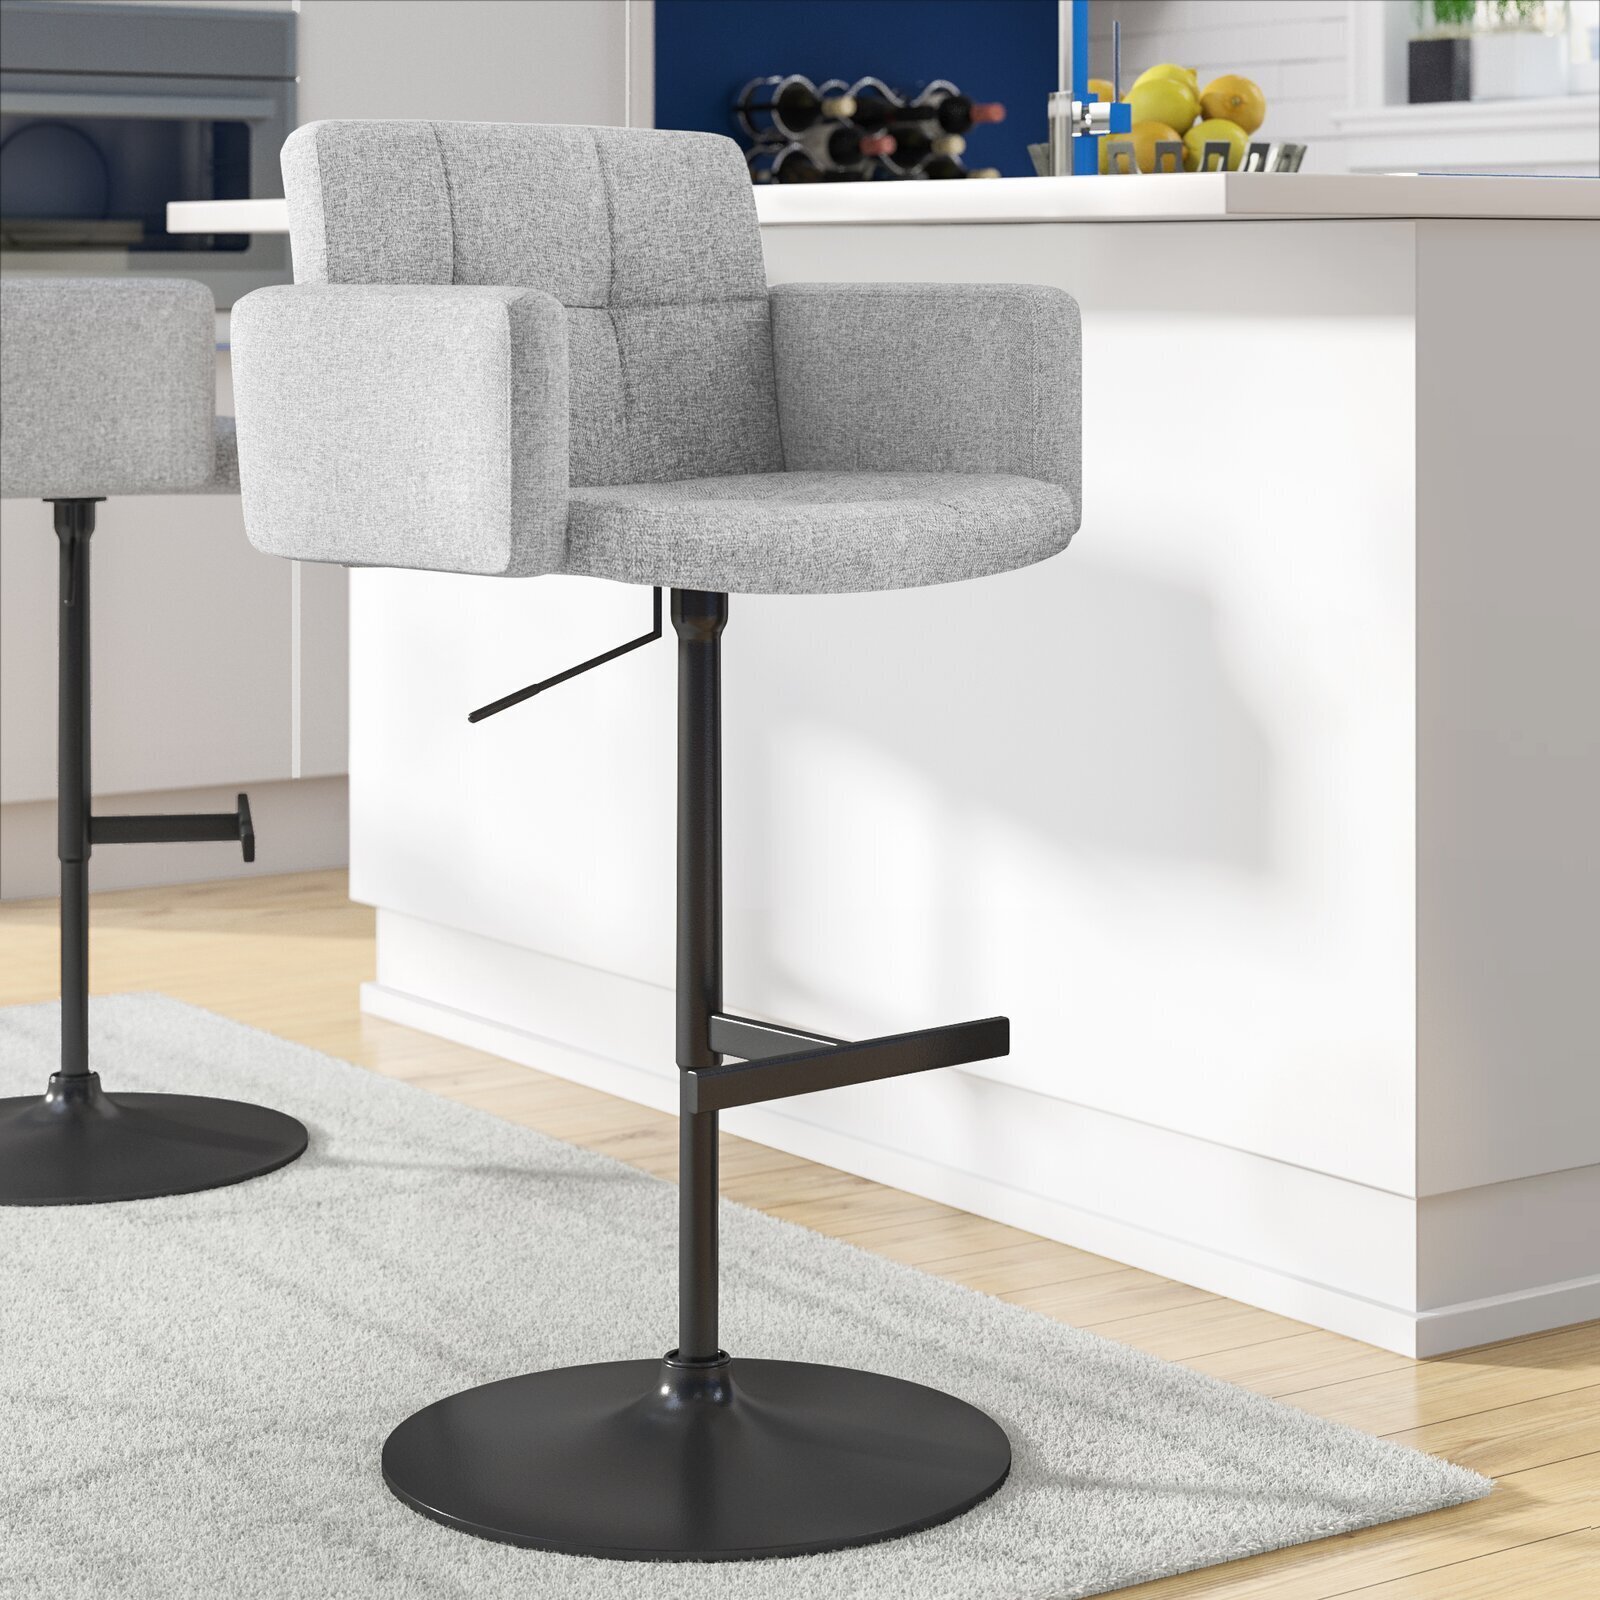 Fabric Upholstered Swivel Bar Stool with Adjustable Height